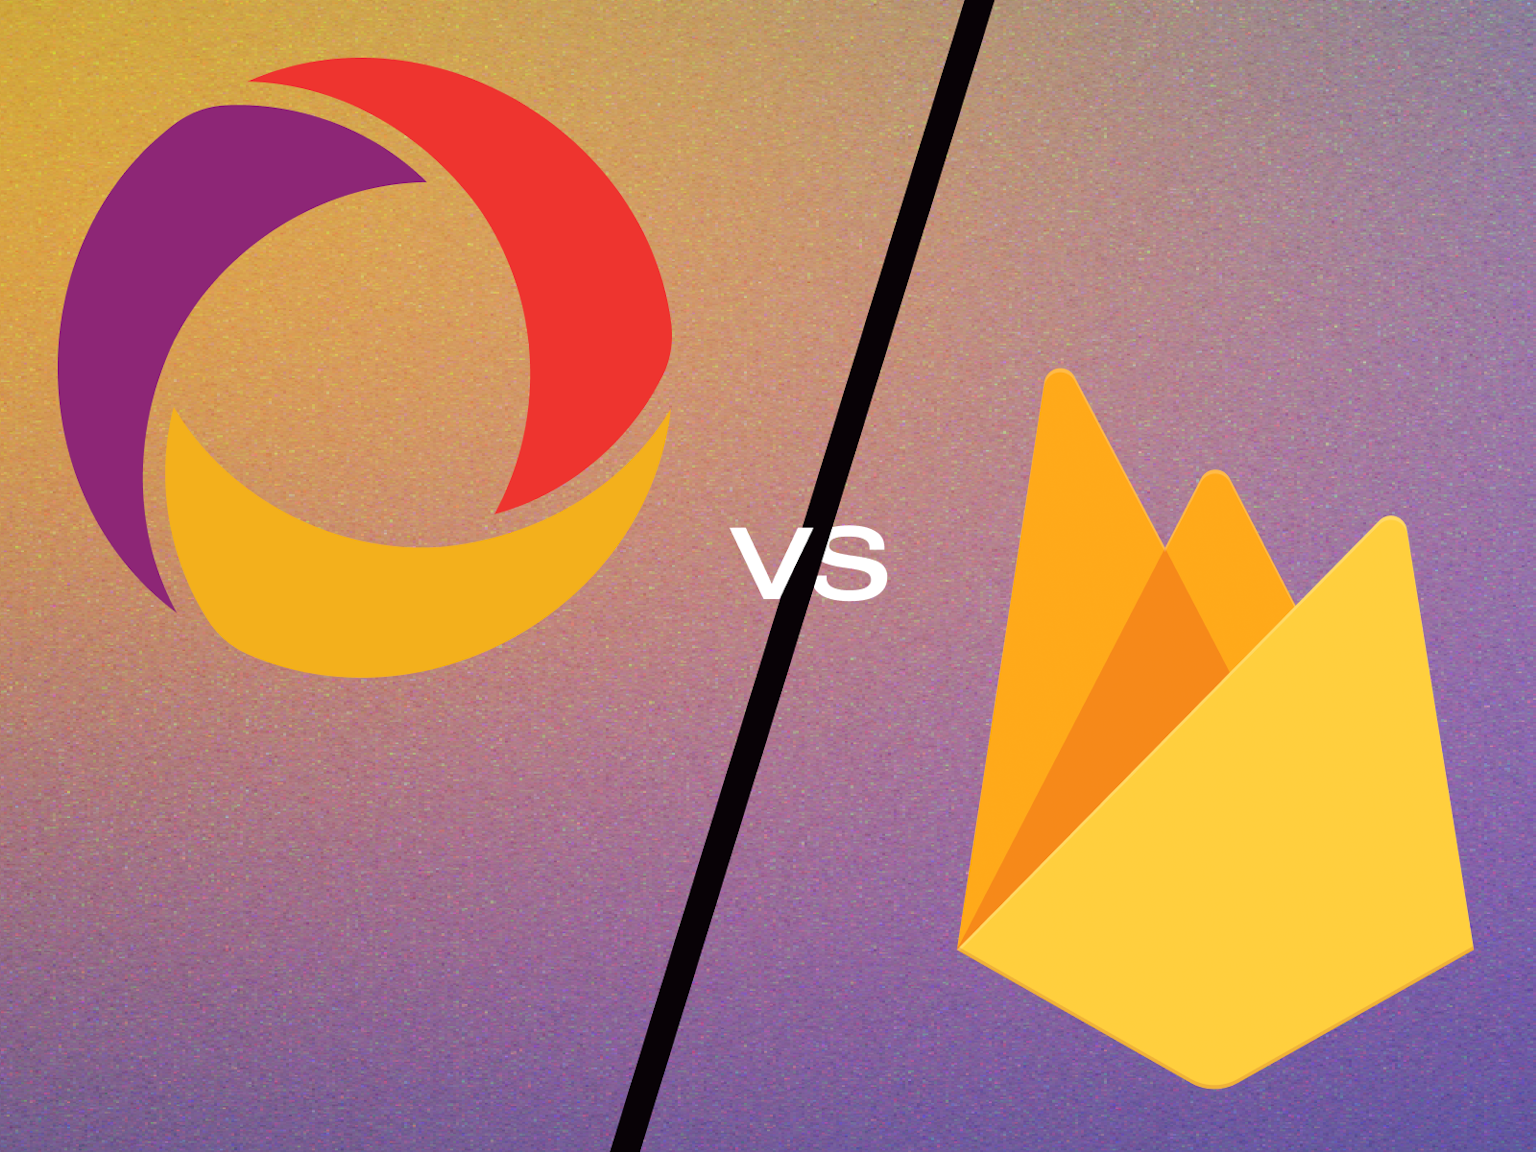 Convex and Firebase logos side by side